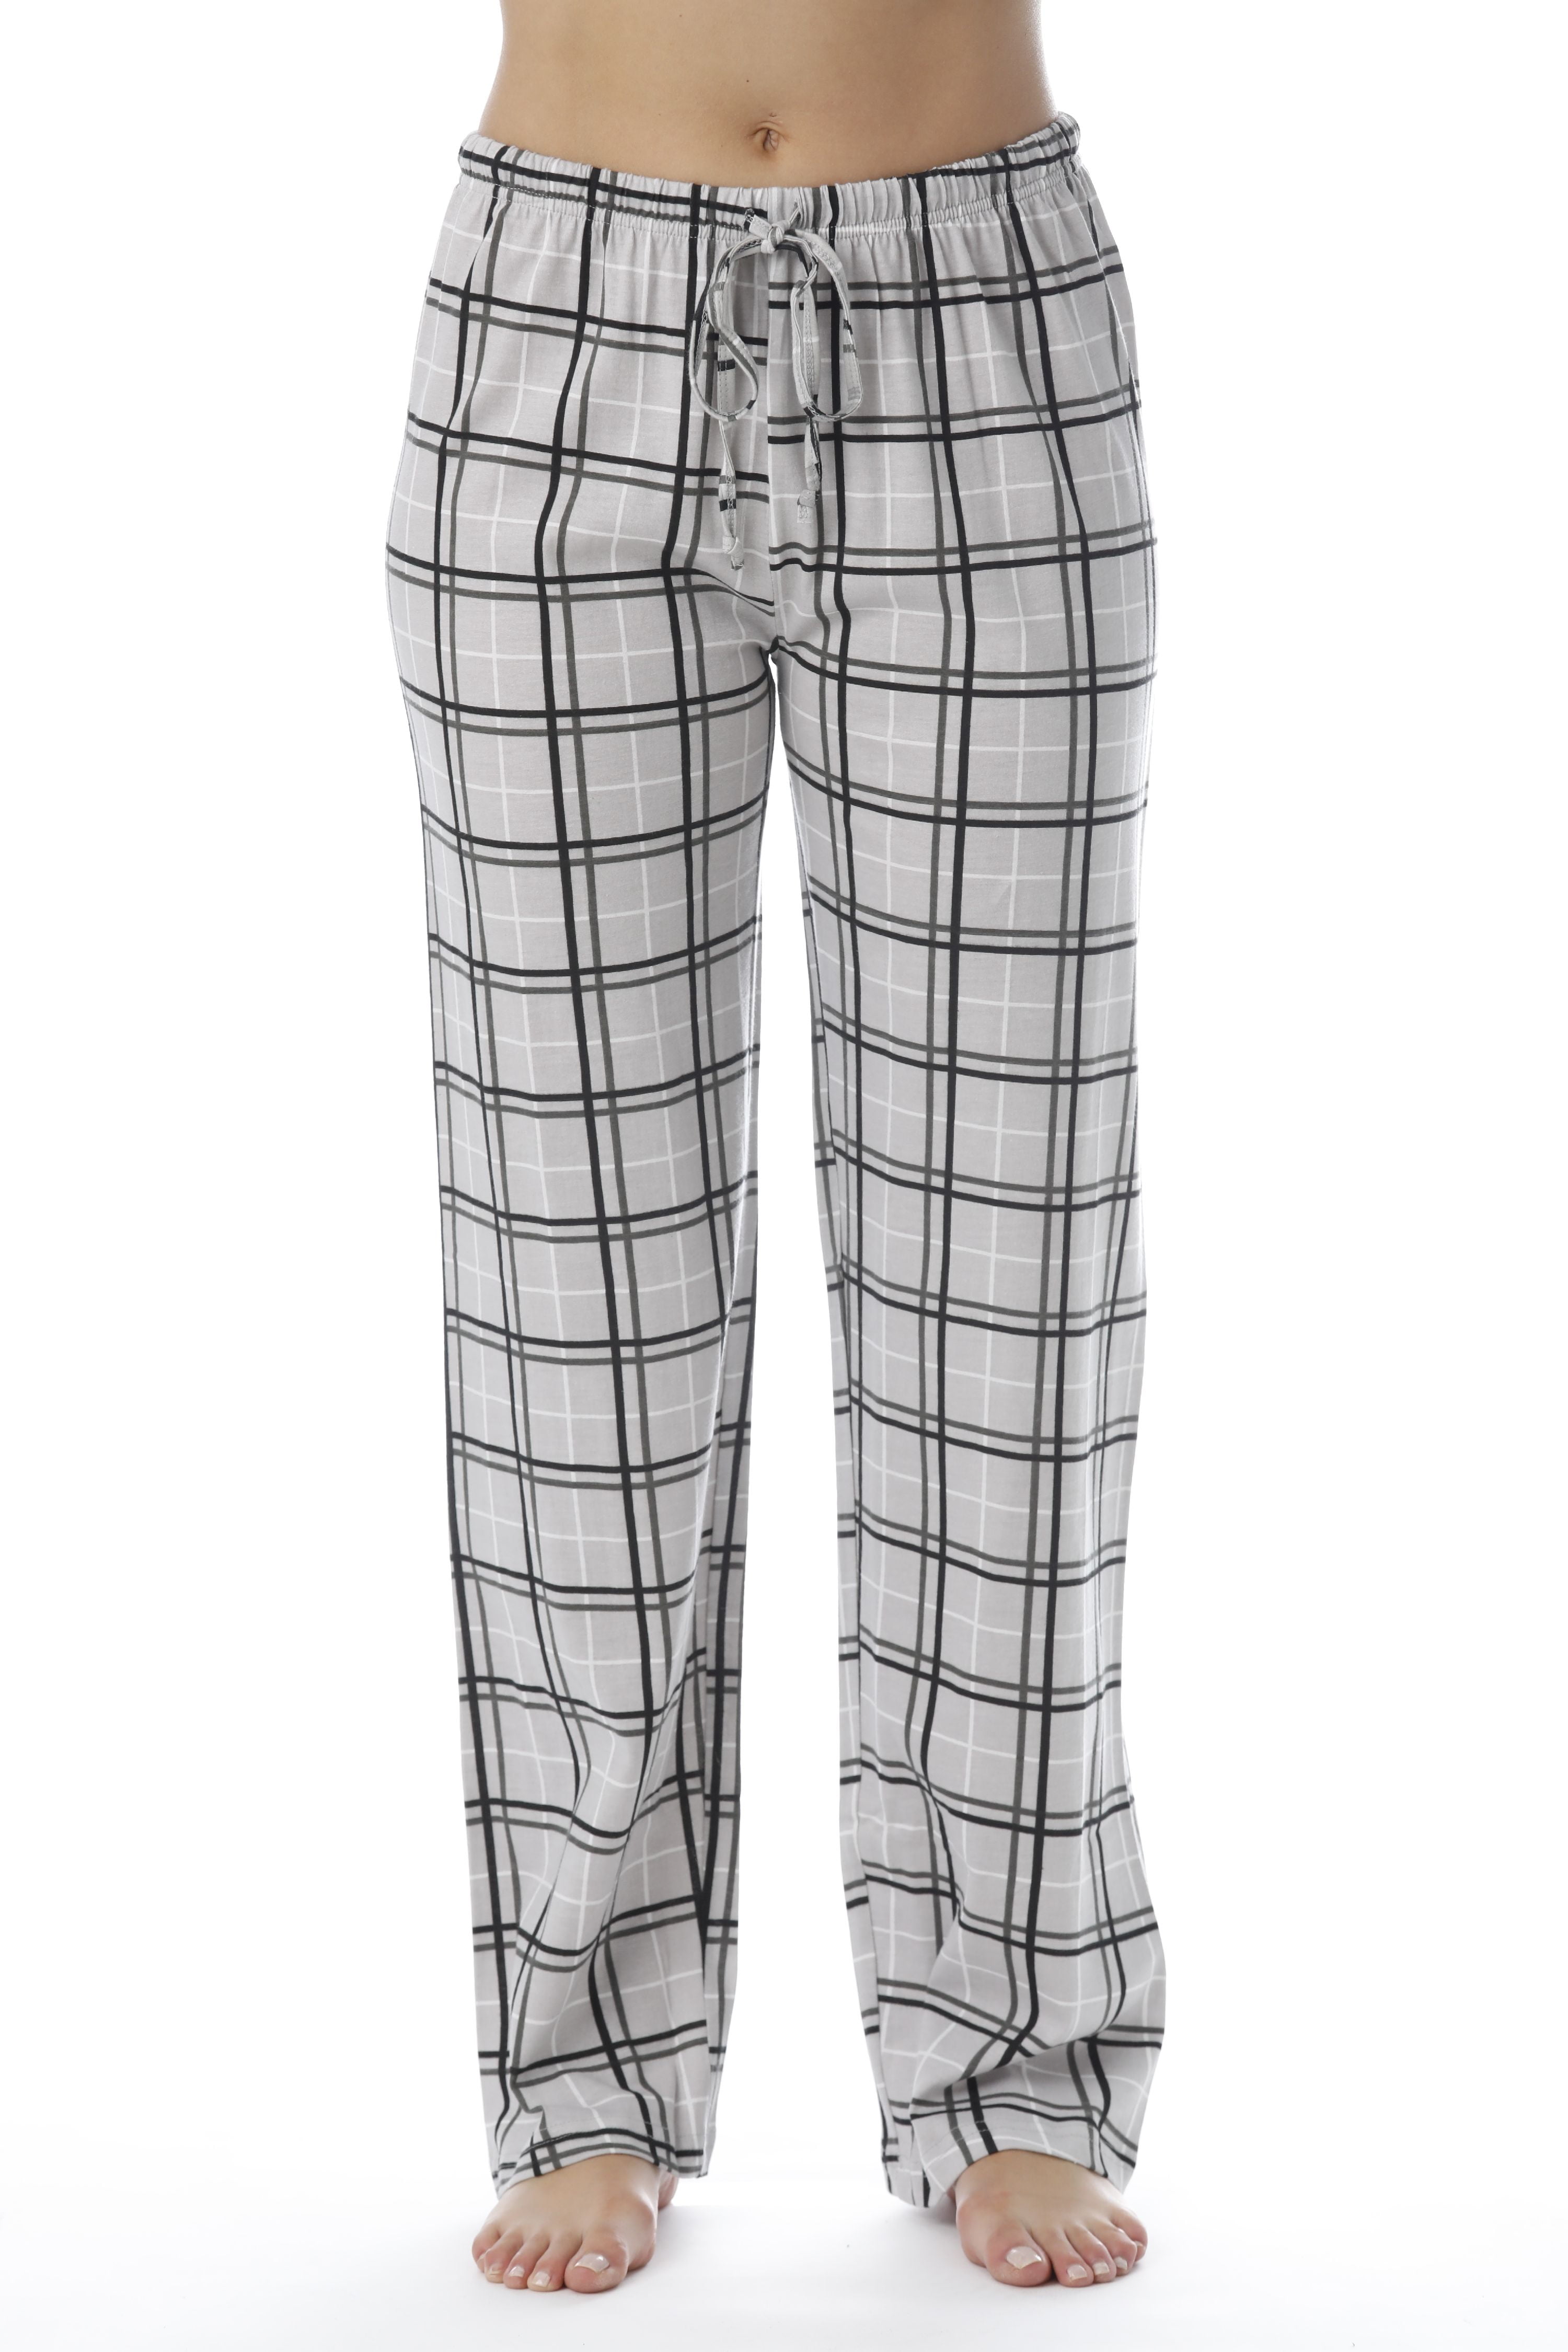 Wardrobe by Westside Black Mini-Houndstooth Checked Tailored Trousers